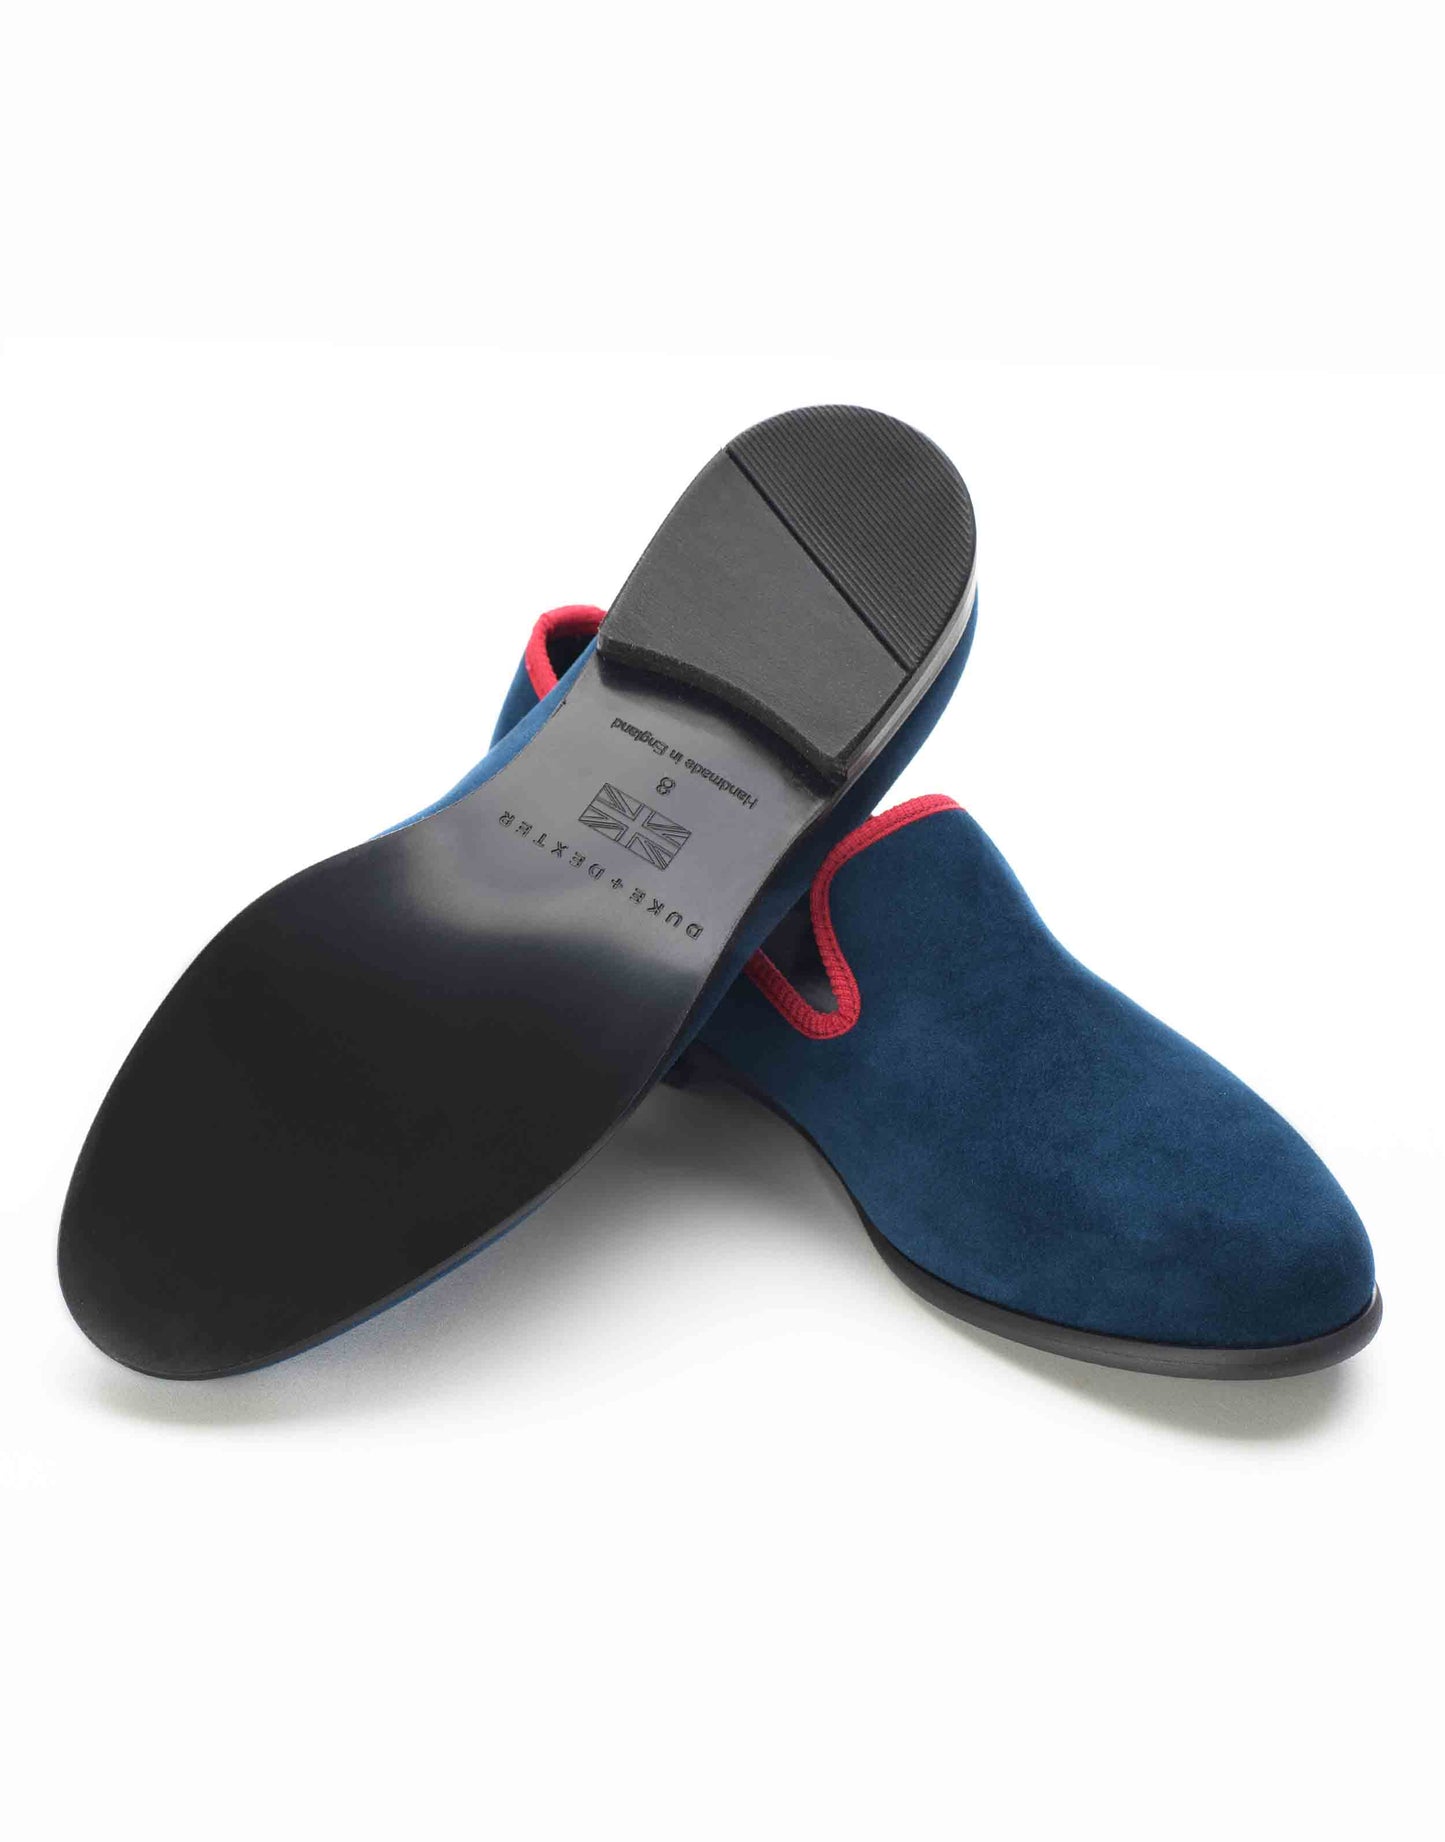 Duke & Dexter Blue with Red Trim Suede Loafers